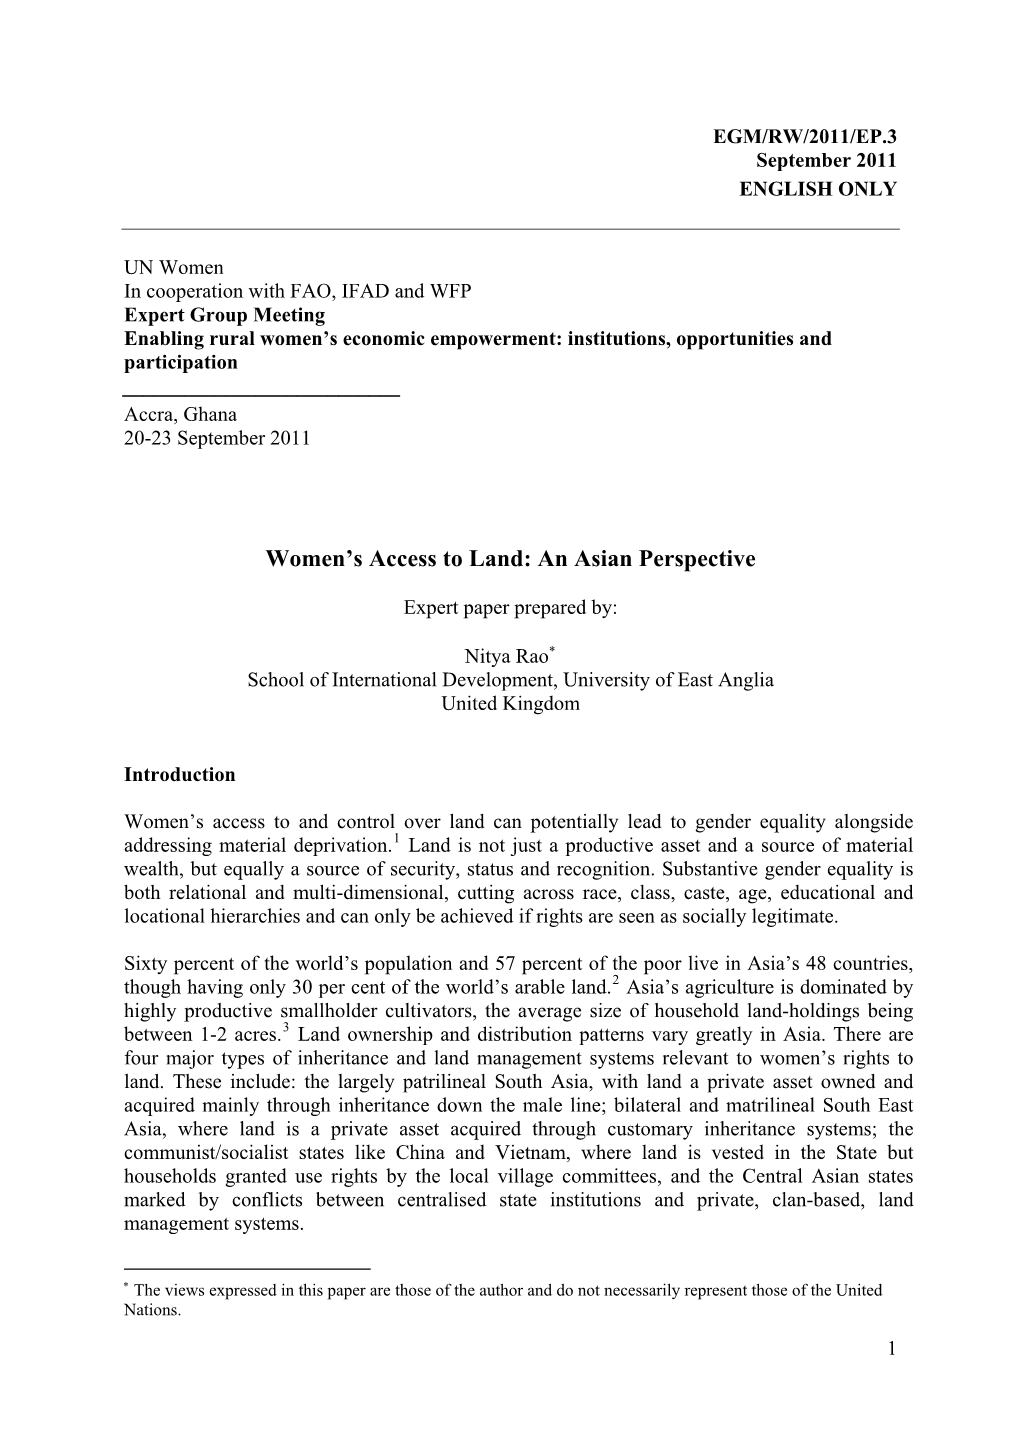 Women's Access to Land: an Asian Perspective (EGM/RW/2011/EP.3)